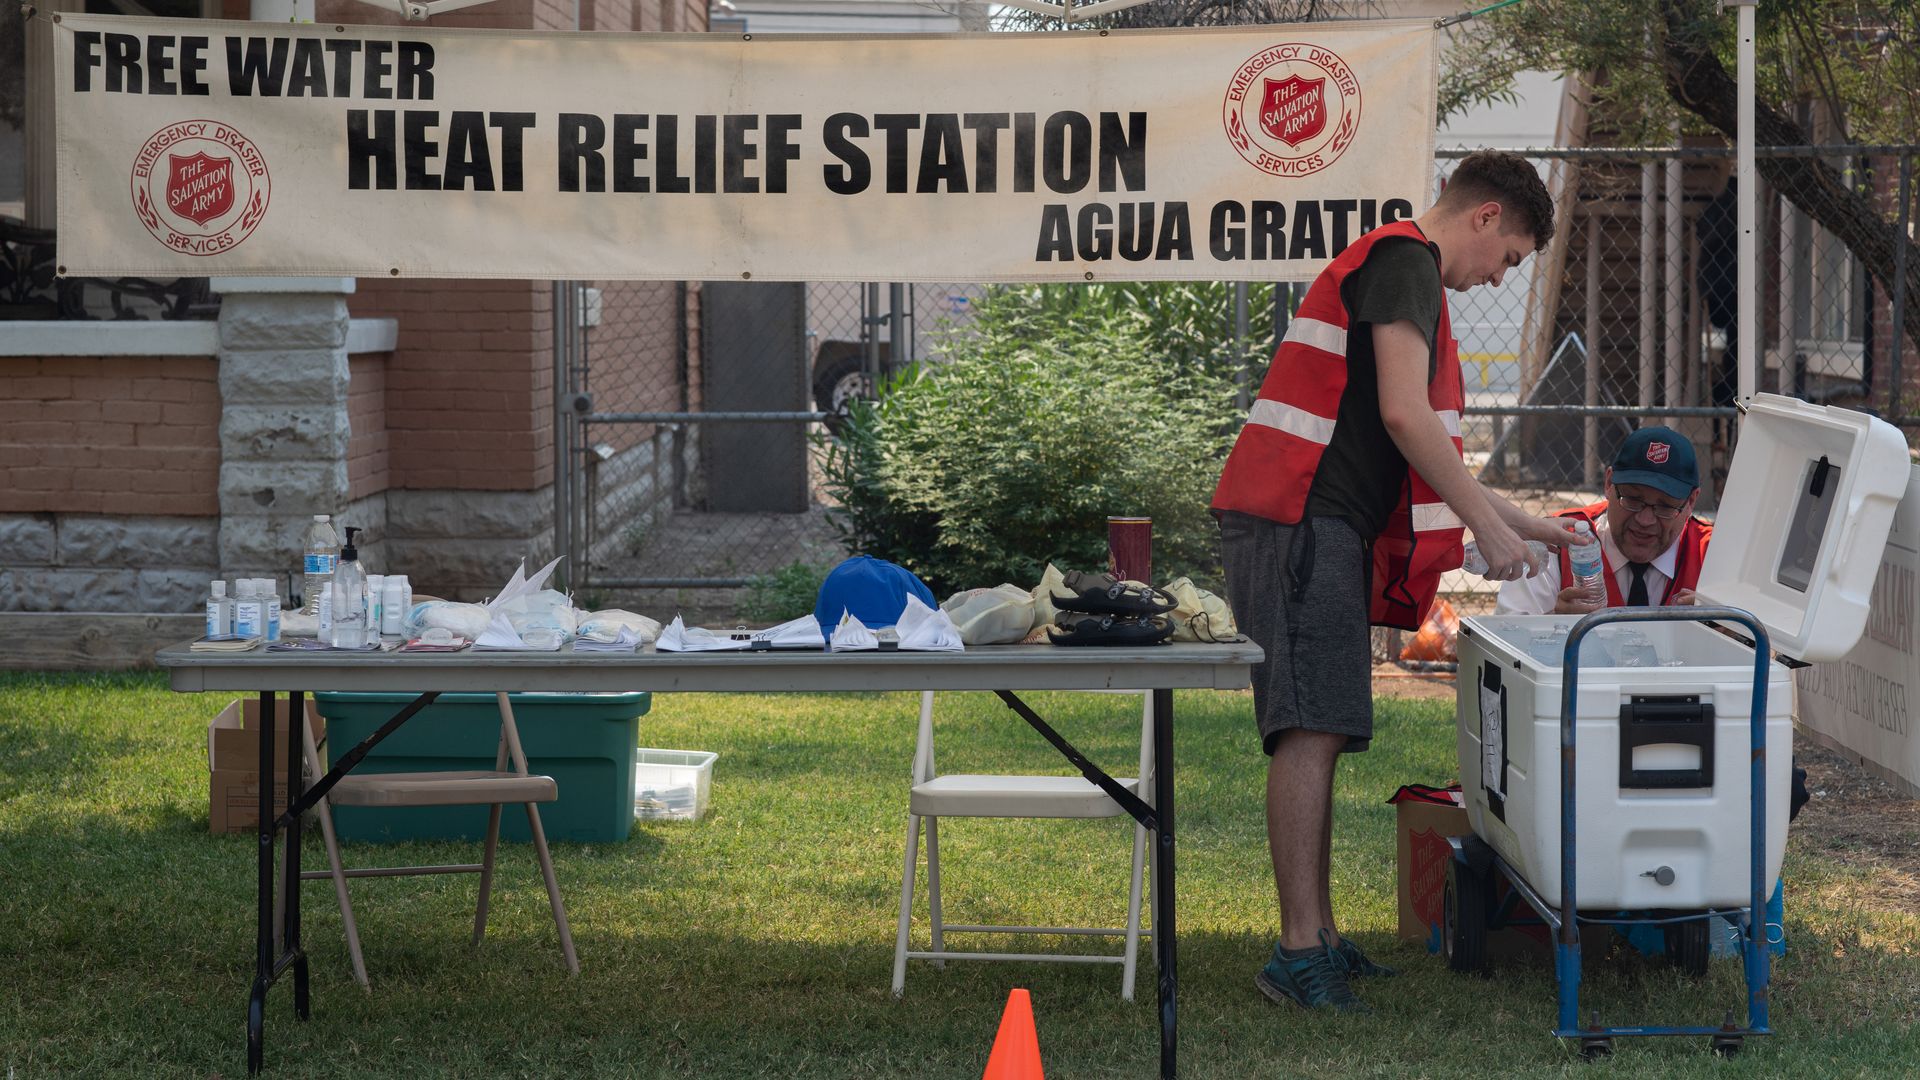 A man putting water in a cooler under a sign that says "Heat Relief Station."